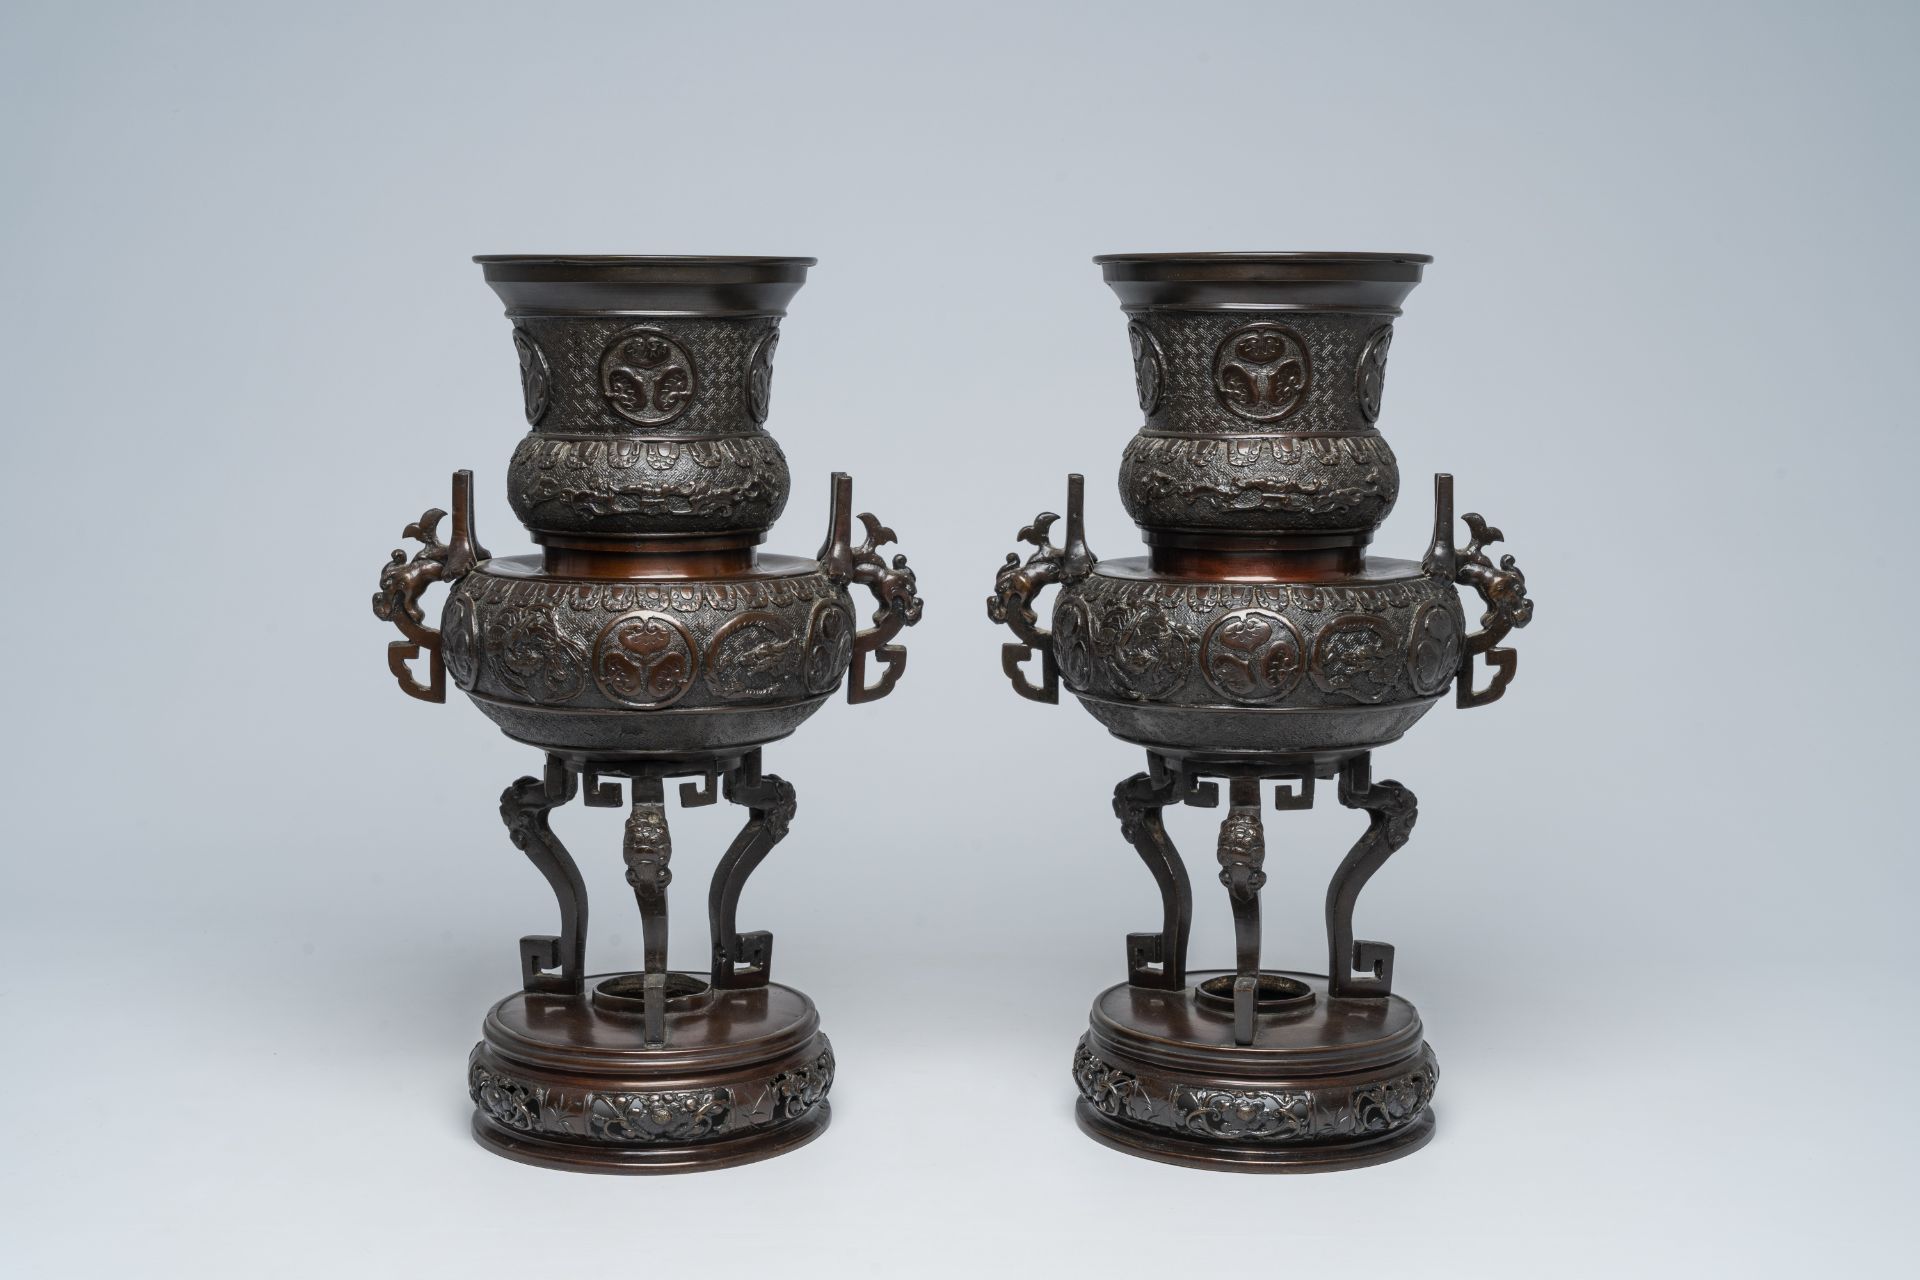 A pair of Japanese bronze vases with Tokugawa medallions in relief, Meiji, 19th C.